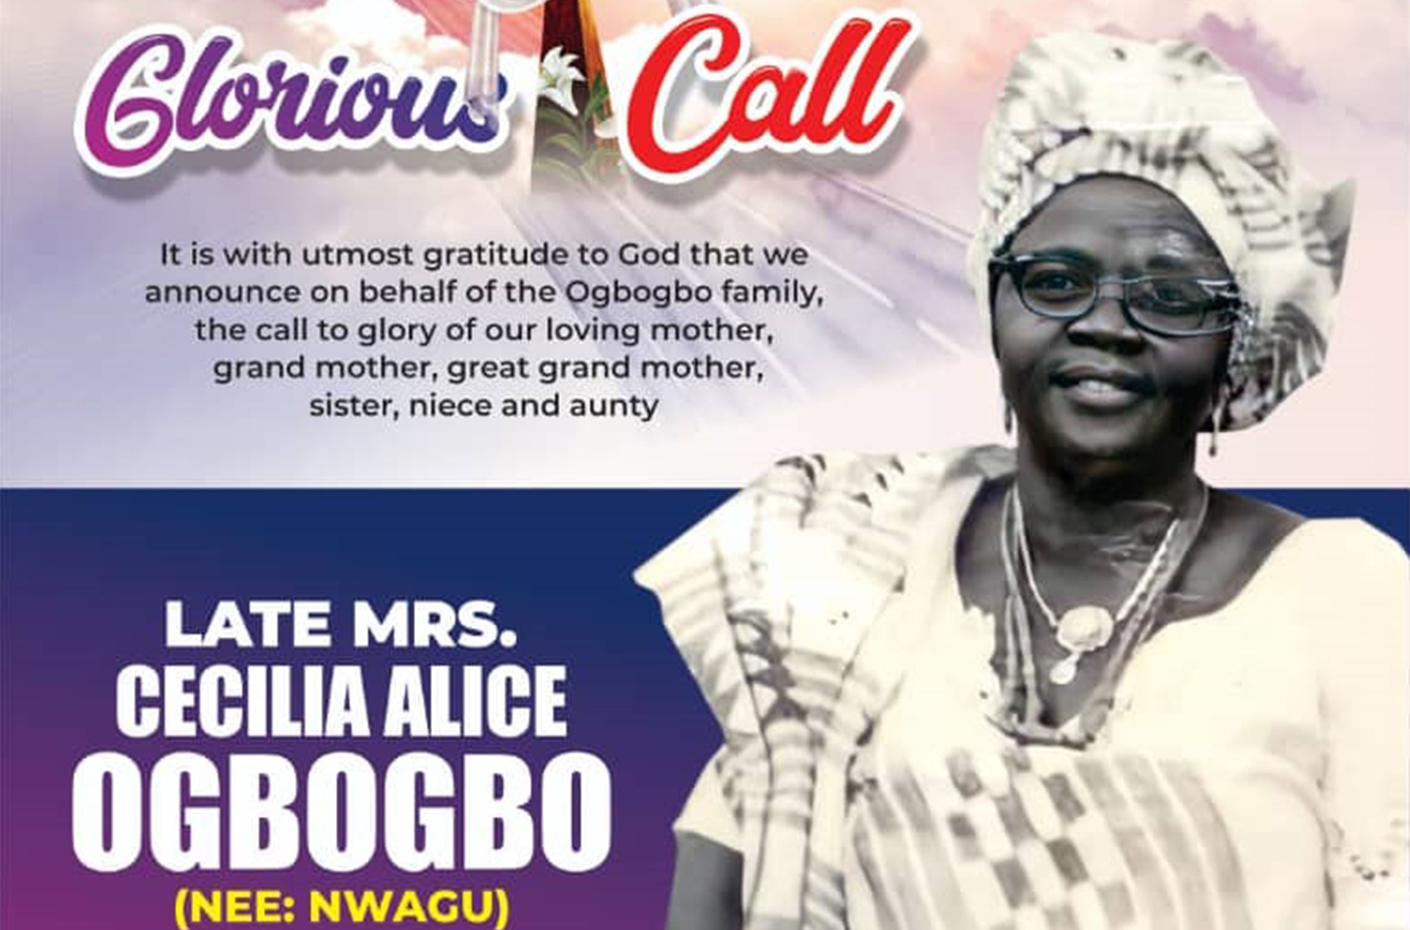 The SPSP mourns the passing of the mother of Distinguished Fellow, Prof. CBN Ogbogbo, fspsp.